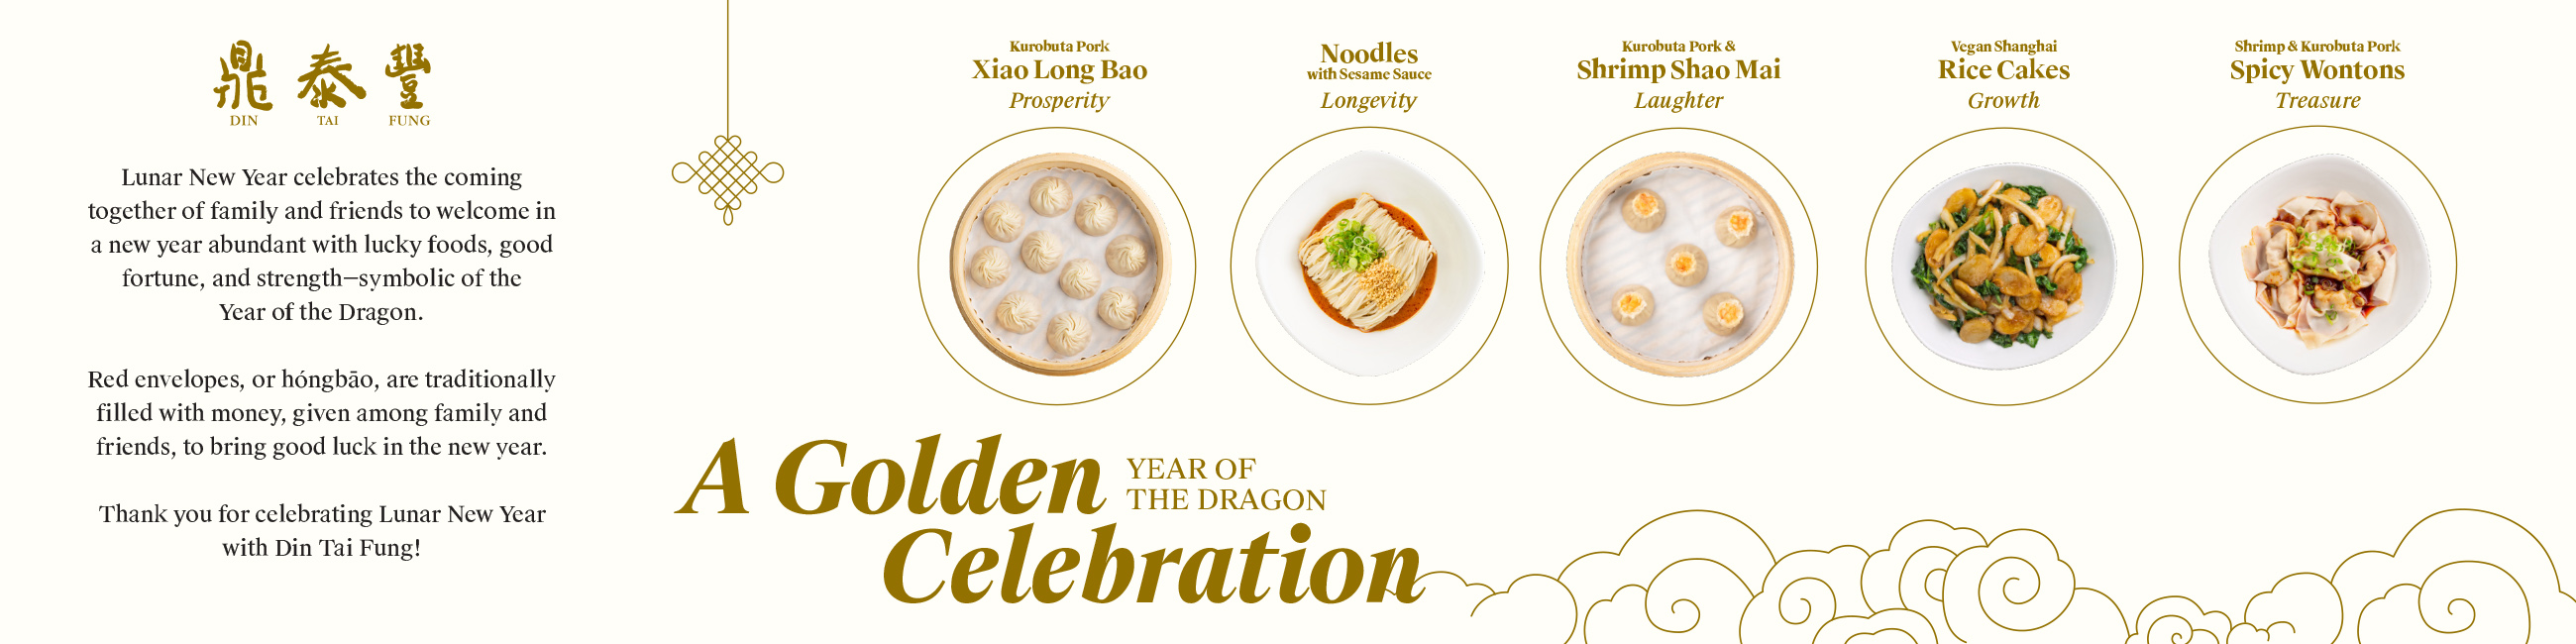 Din Tai Fung dine-in guests will receive red envelopes with an insert calendar providing fun background on Lunar New Year and the lucky foods found on Din Tai Fung's menu.